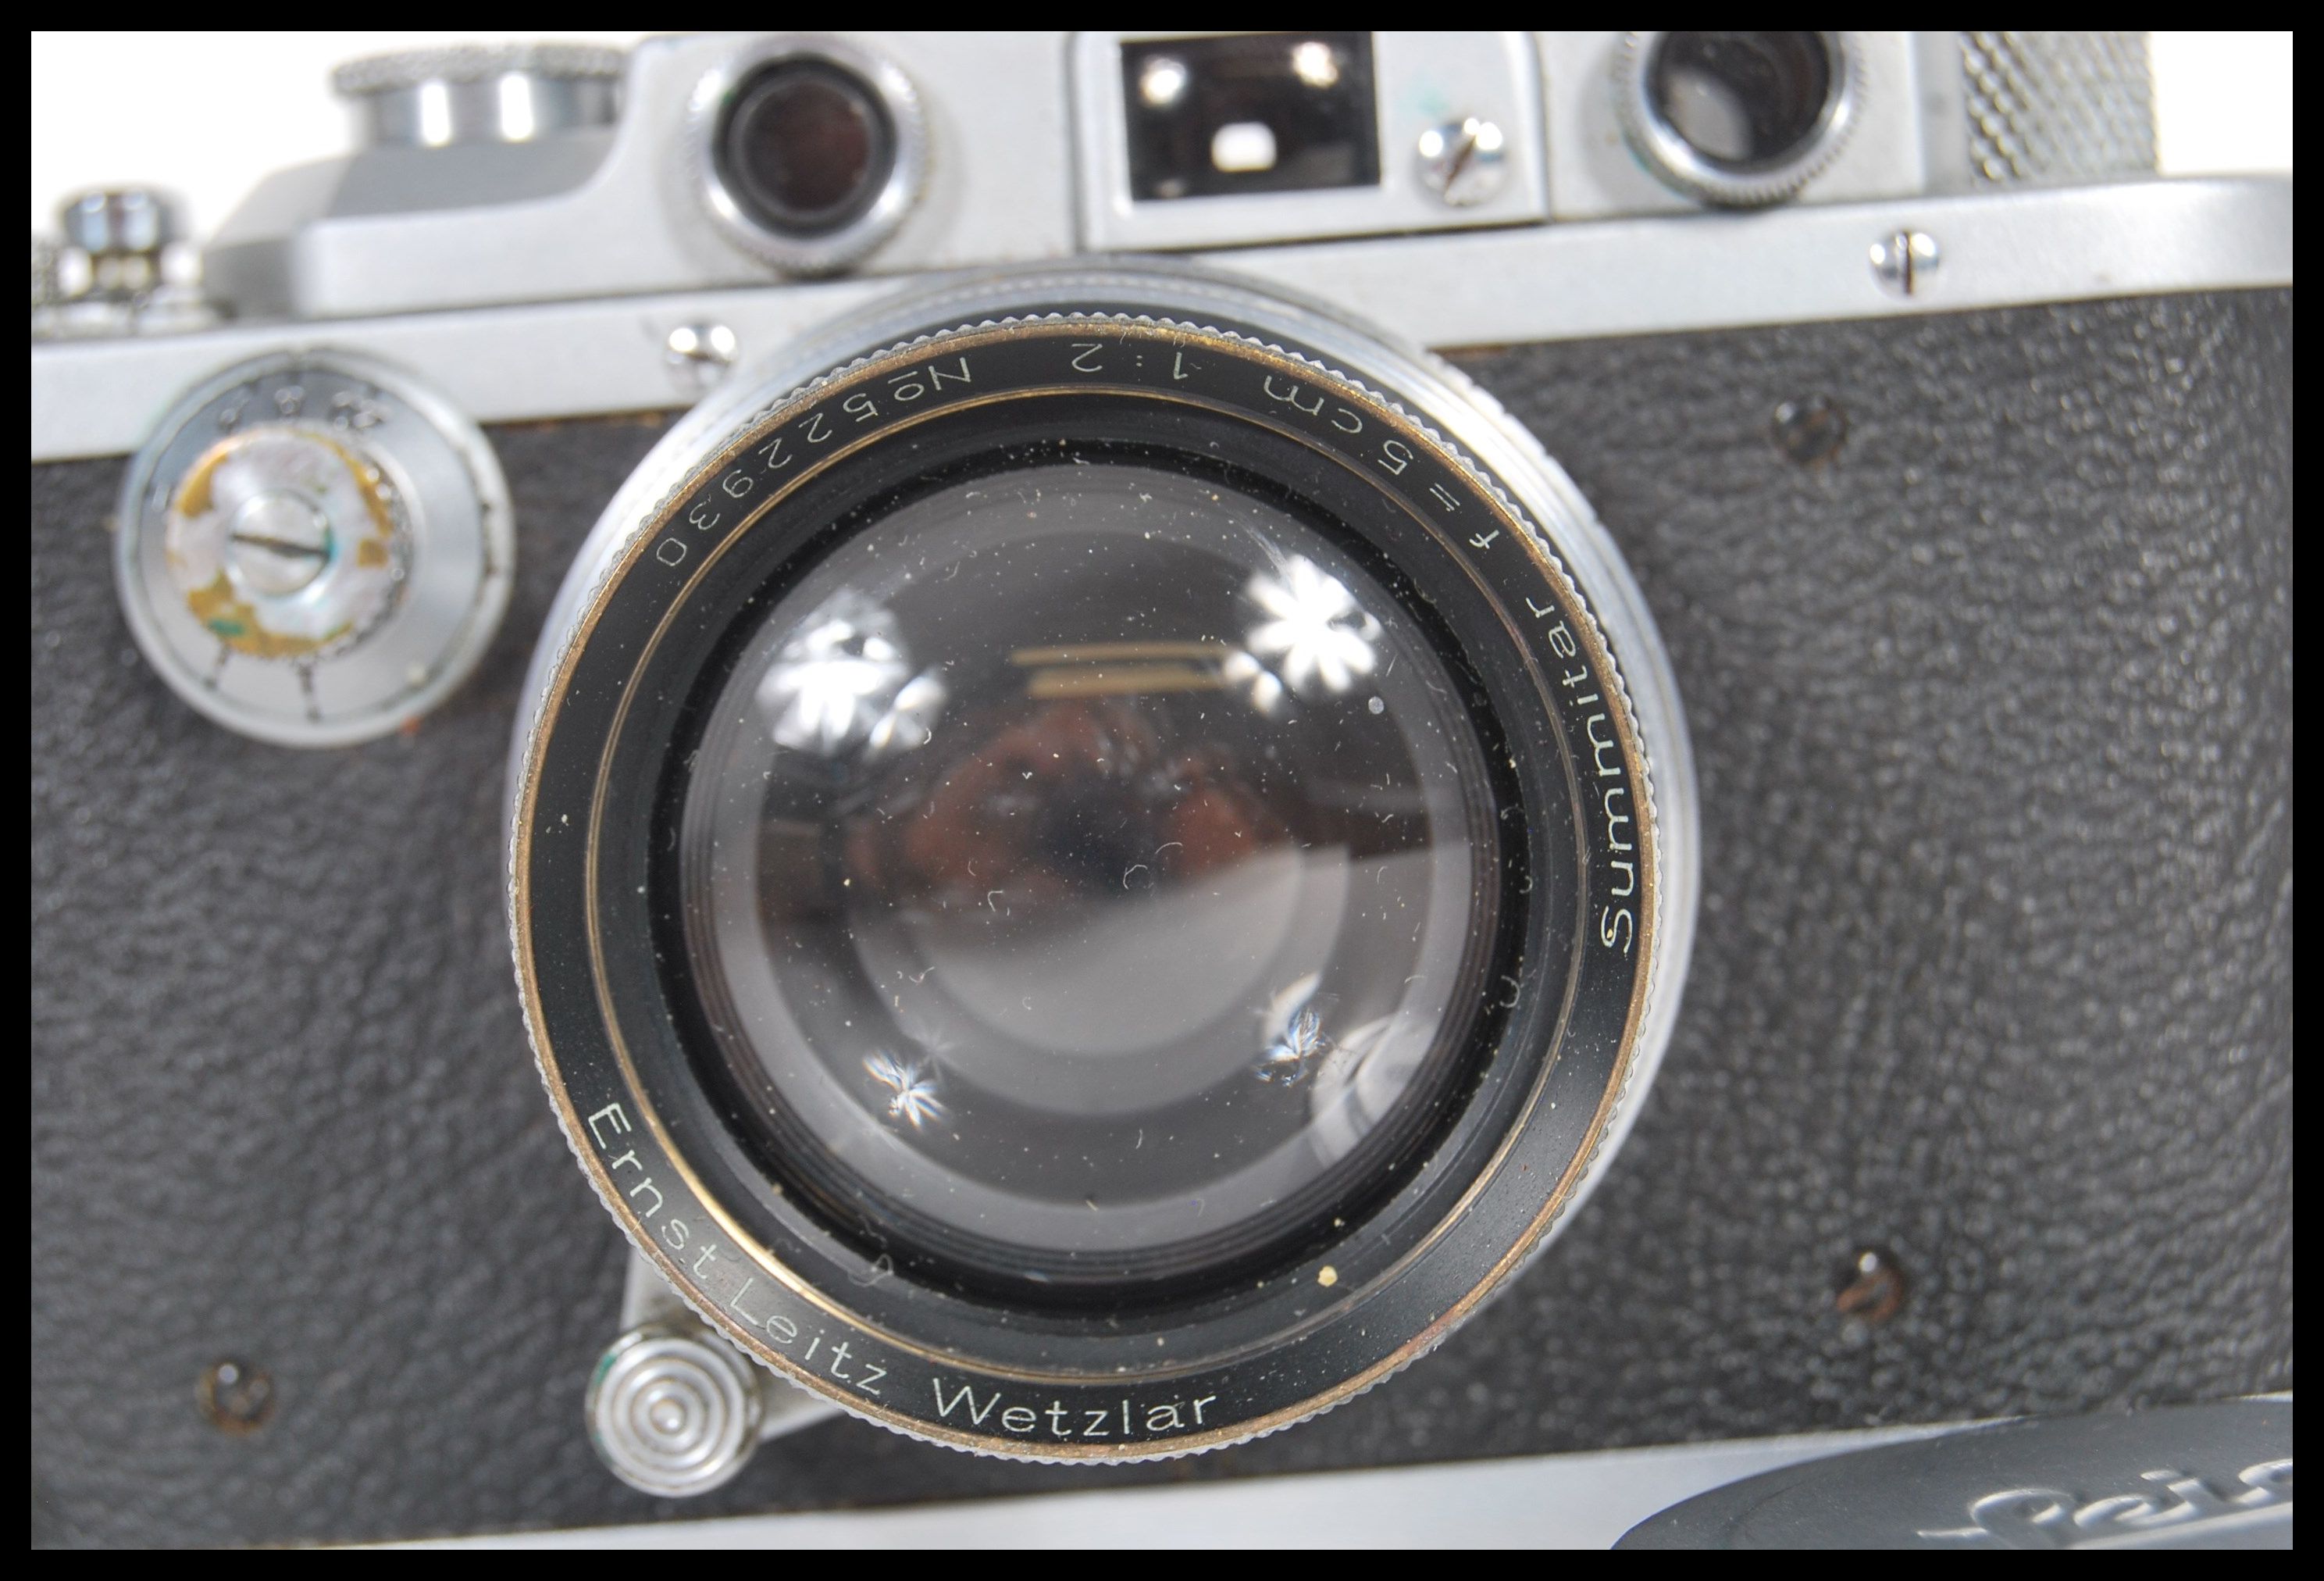 A Leica lll D.P.R Rangefinder chrome camera by Ernst Leitz Wetzlar Germany, Serial number 343924. - Image 3 of 7